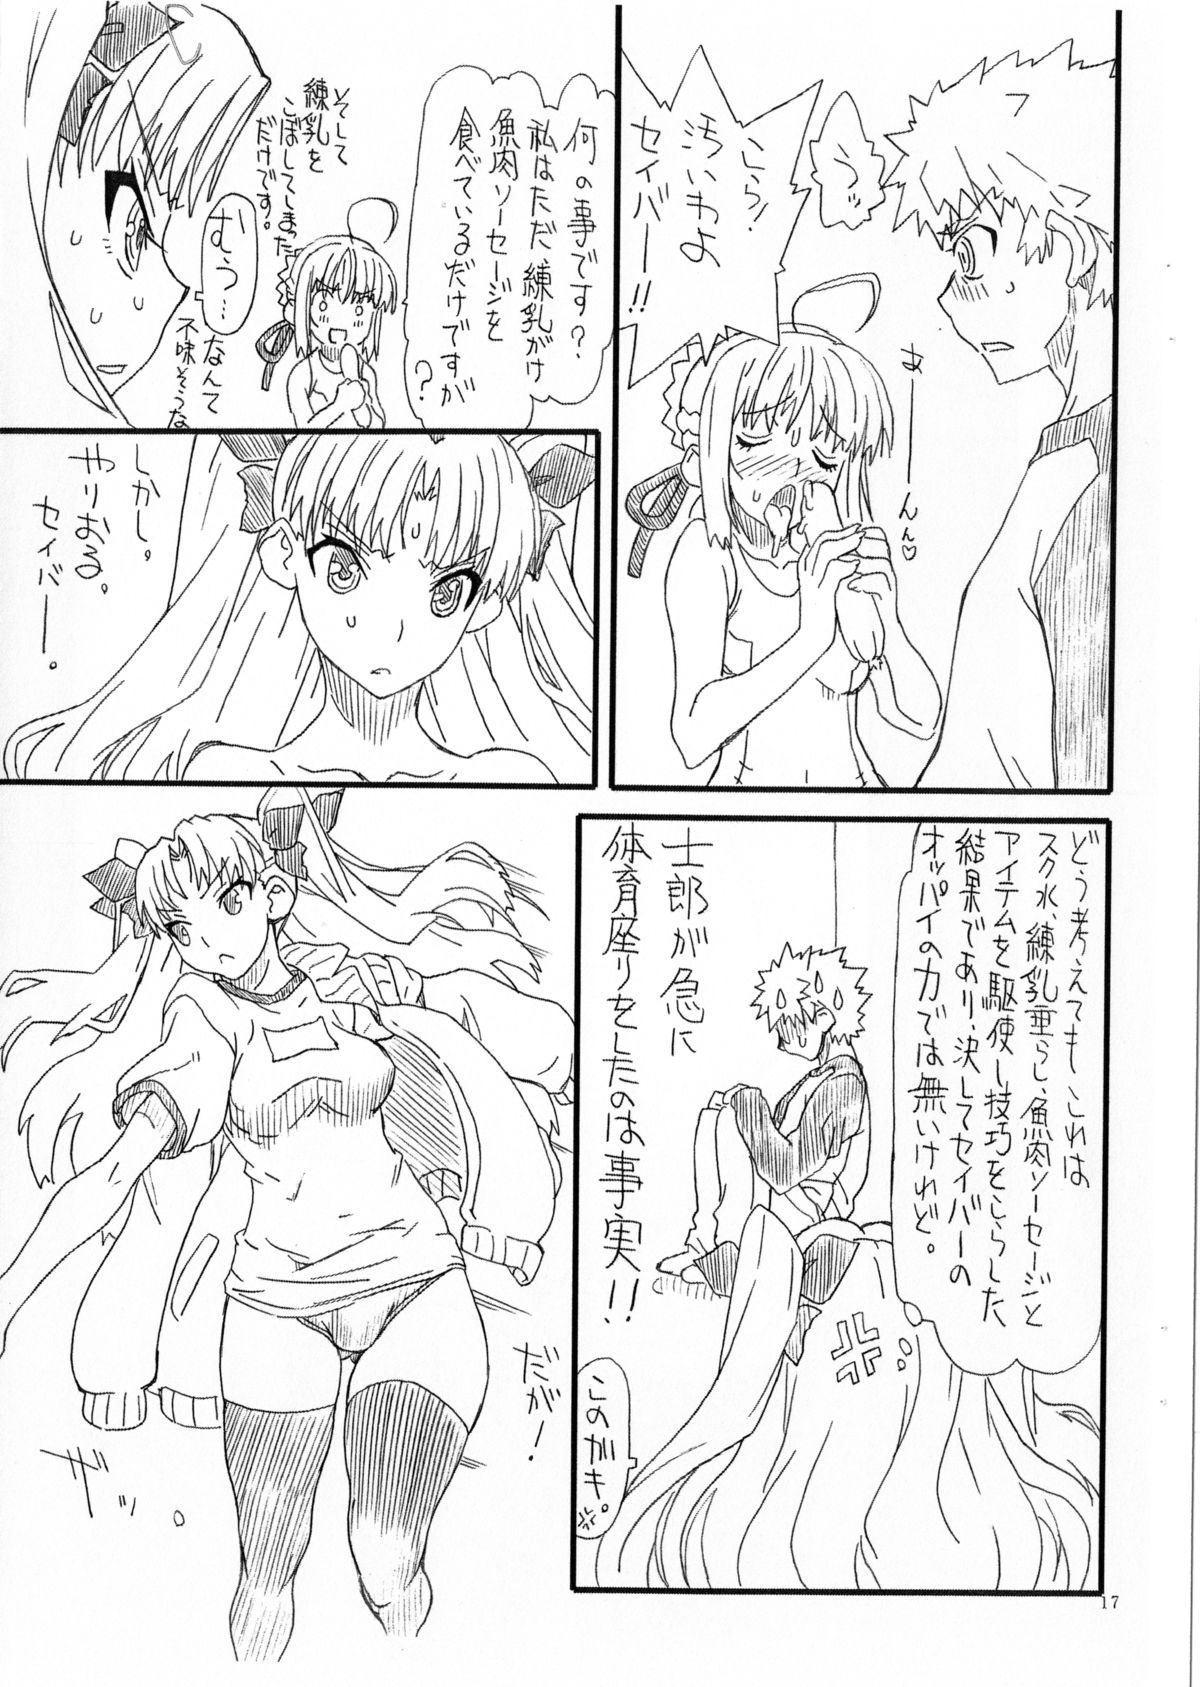 (SC65) [Power Slide (Uttorikun)] Rin to saber 1st Ver0.5 (Fate/stay night) page 18 full